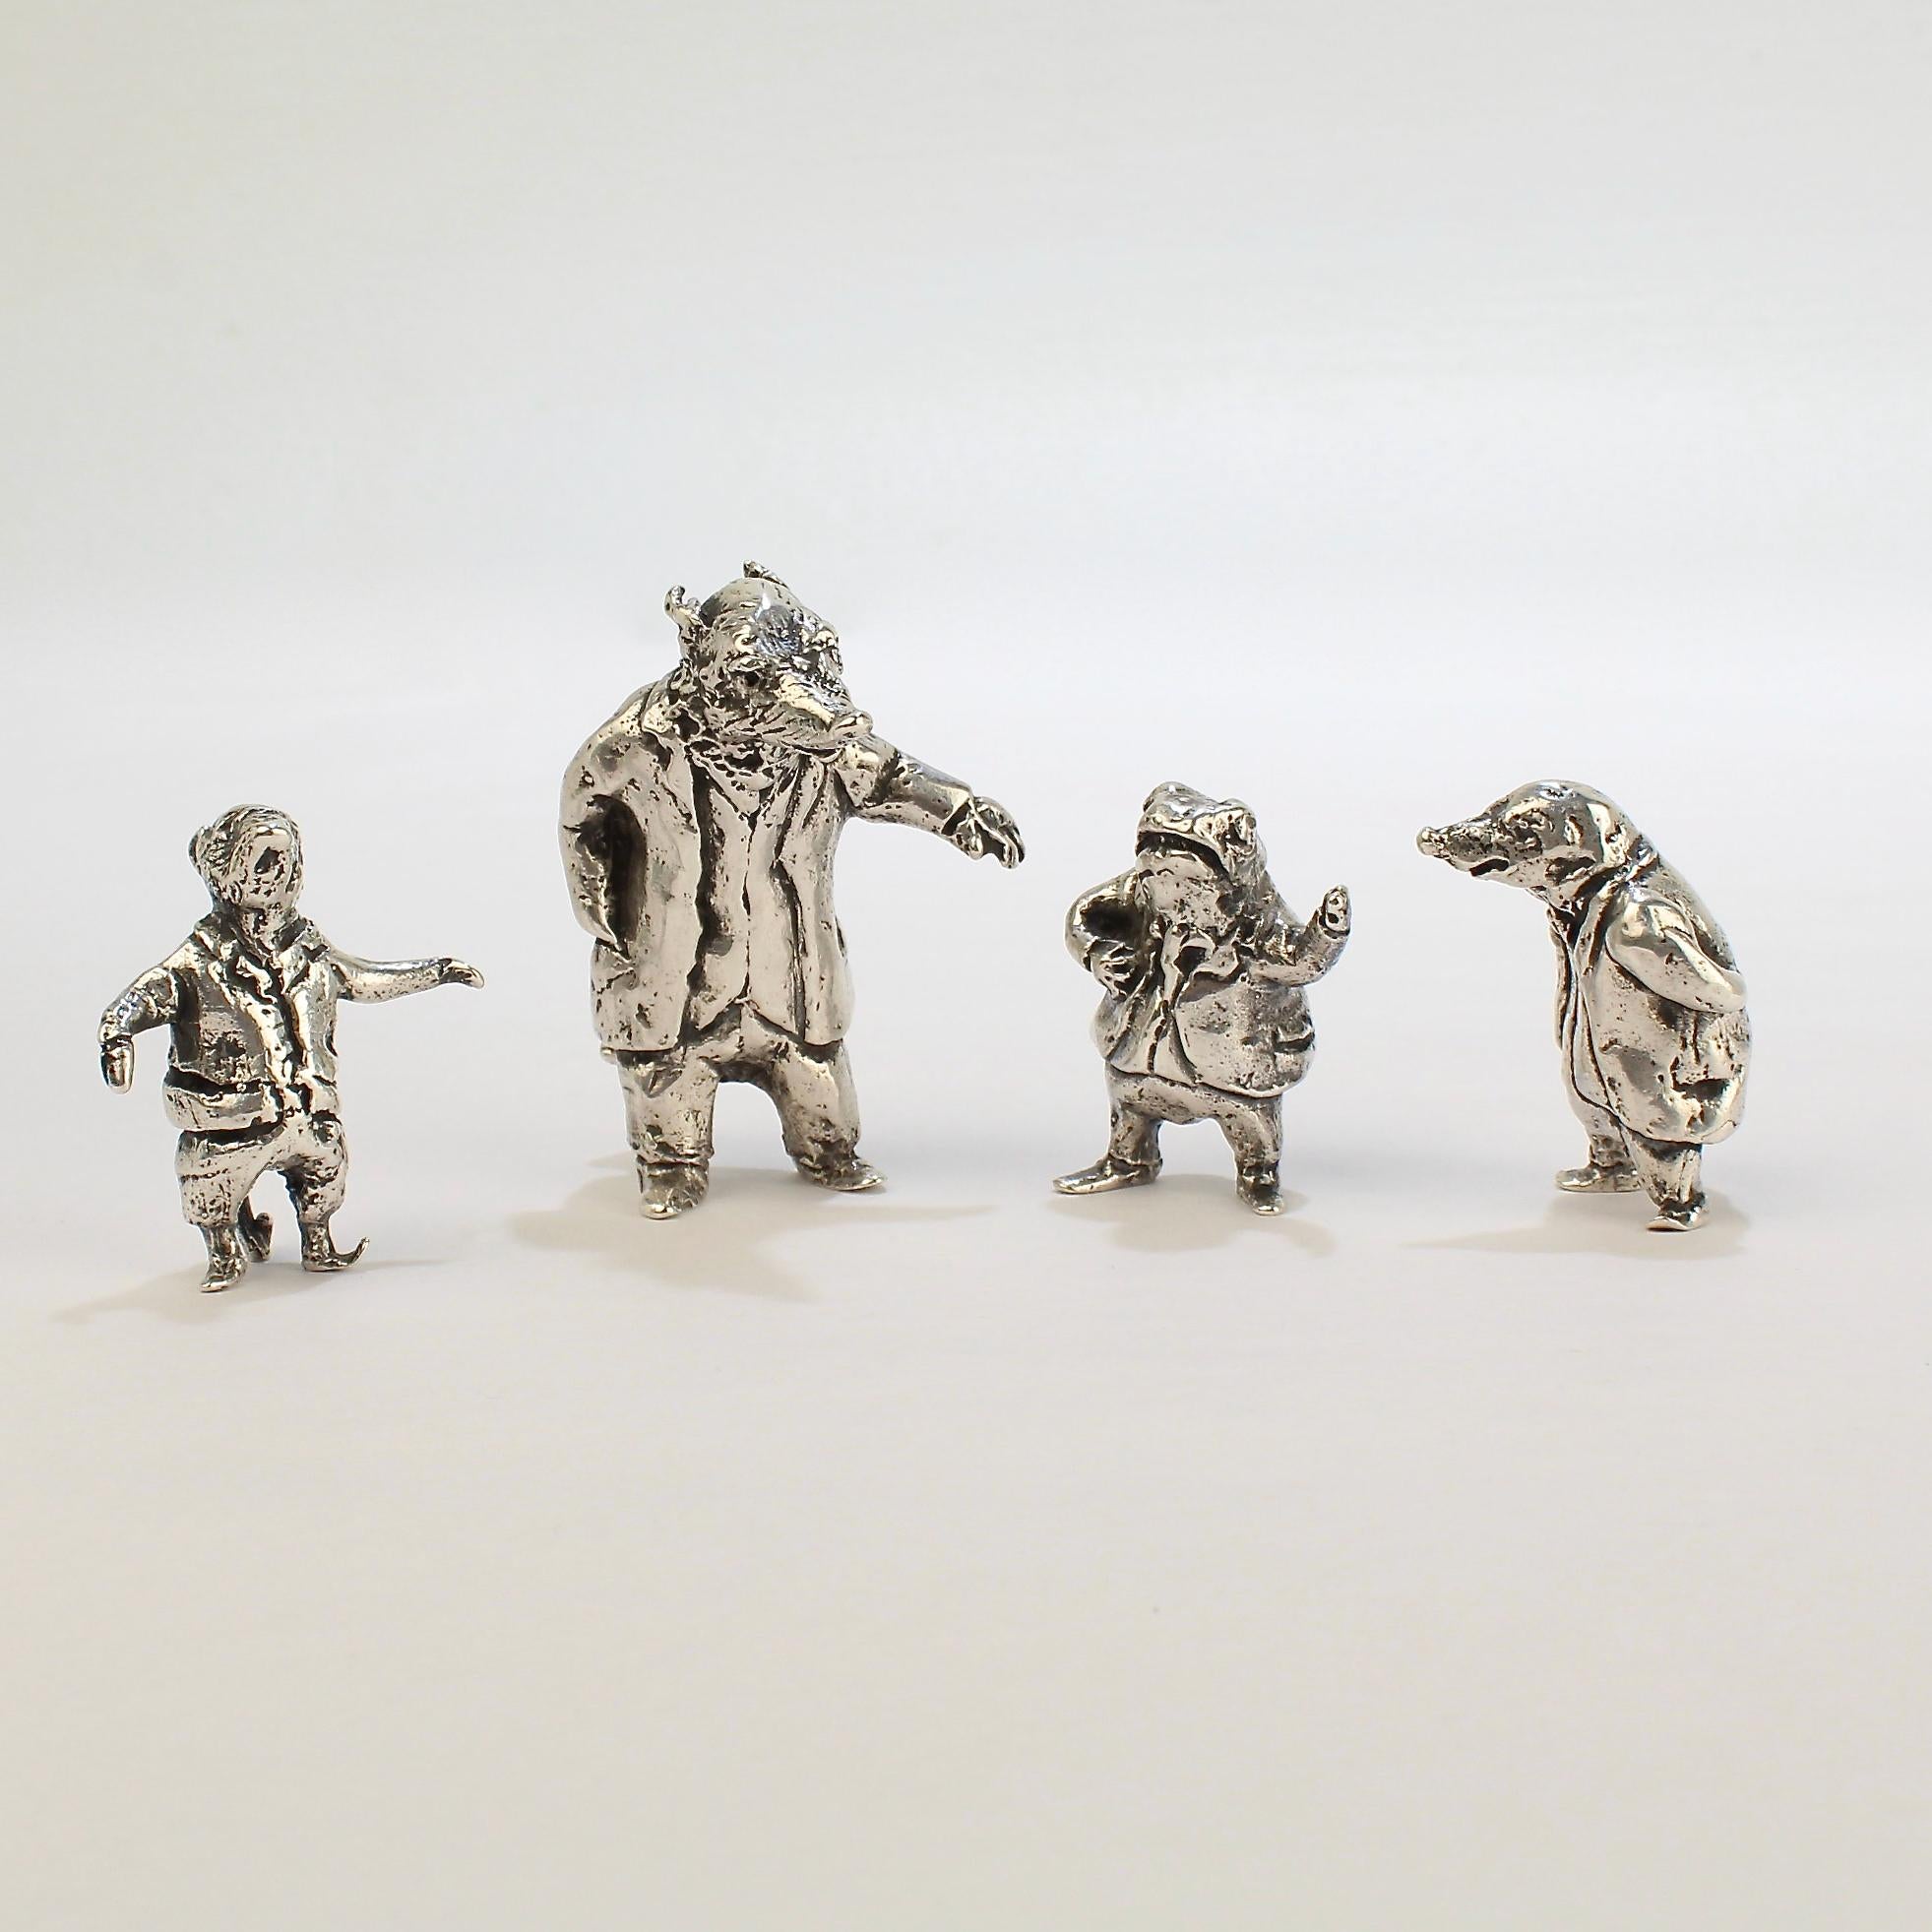 A very fine vintage set of Wind in the Willows sterling silver miniature sculptures or figurines.

The set includes the story book characters of Toad, Badger, Ratty and Mole. 

They were cast by Sterling E. Lanier, a noted author and sculptor.